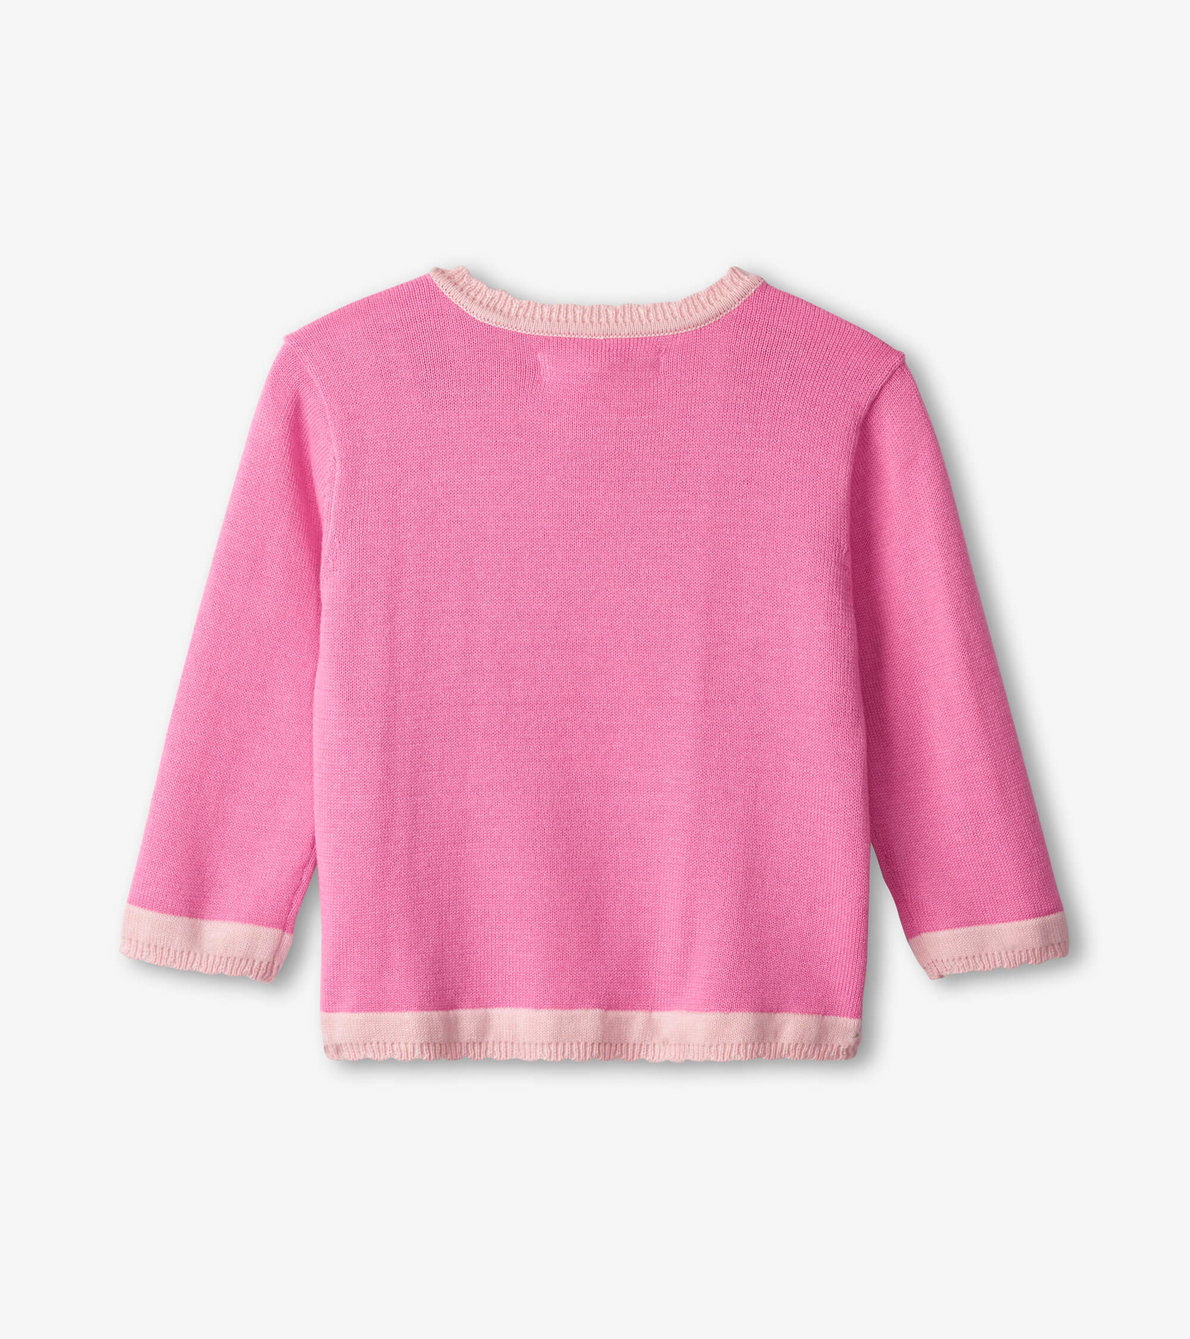 View larger image of Soft Fawn Baby Pom Pom Sweater